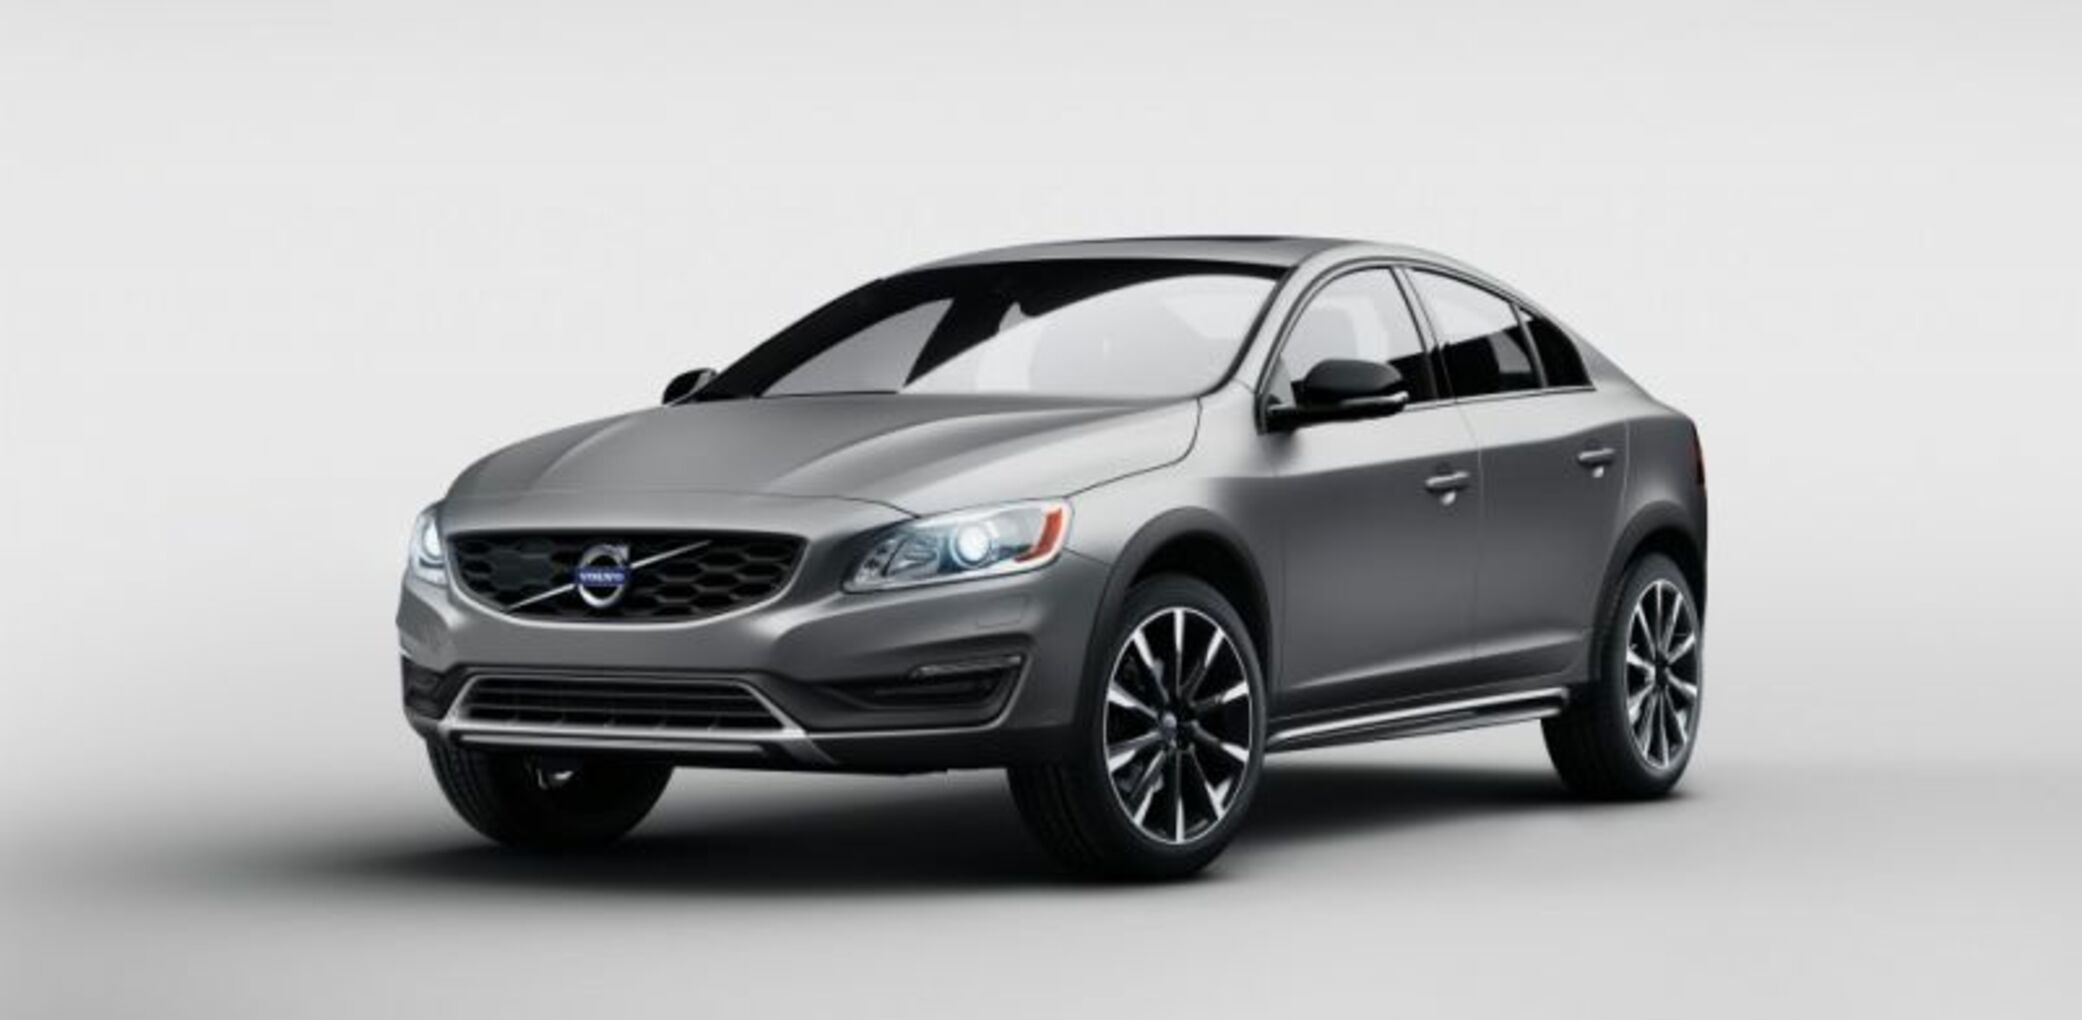 Volvo S60 II Cross Country 2.4 D4 (190 Hp) AWD Automatic 2015, 2016, 2017, 2018 